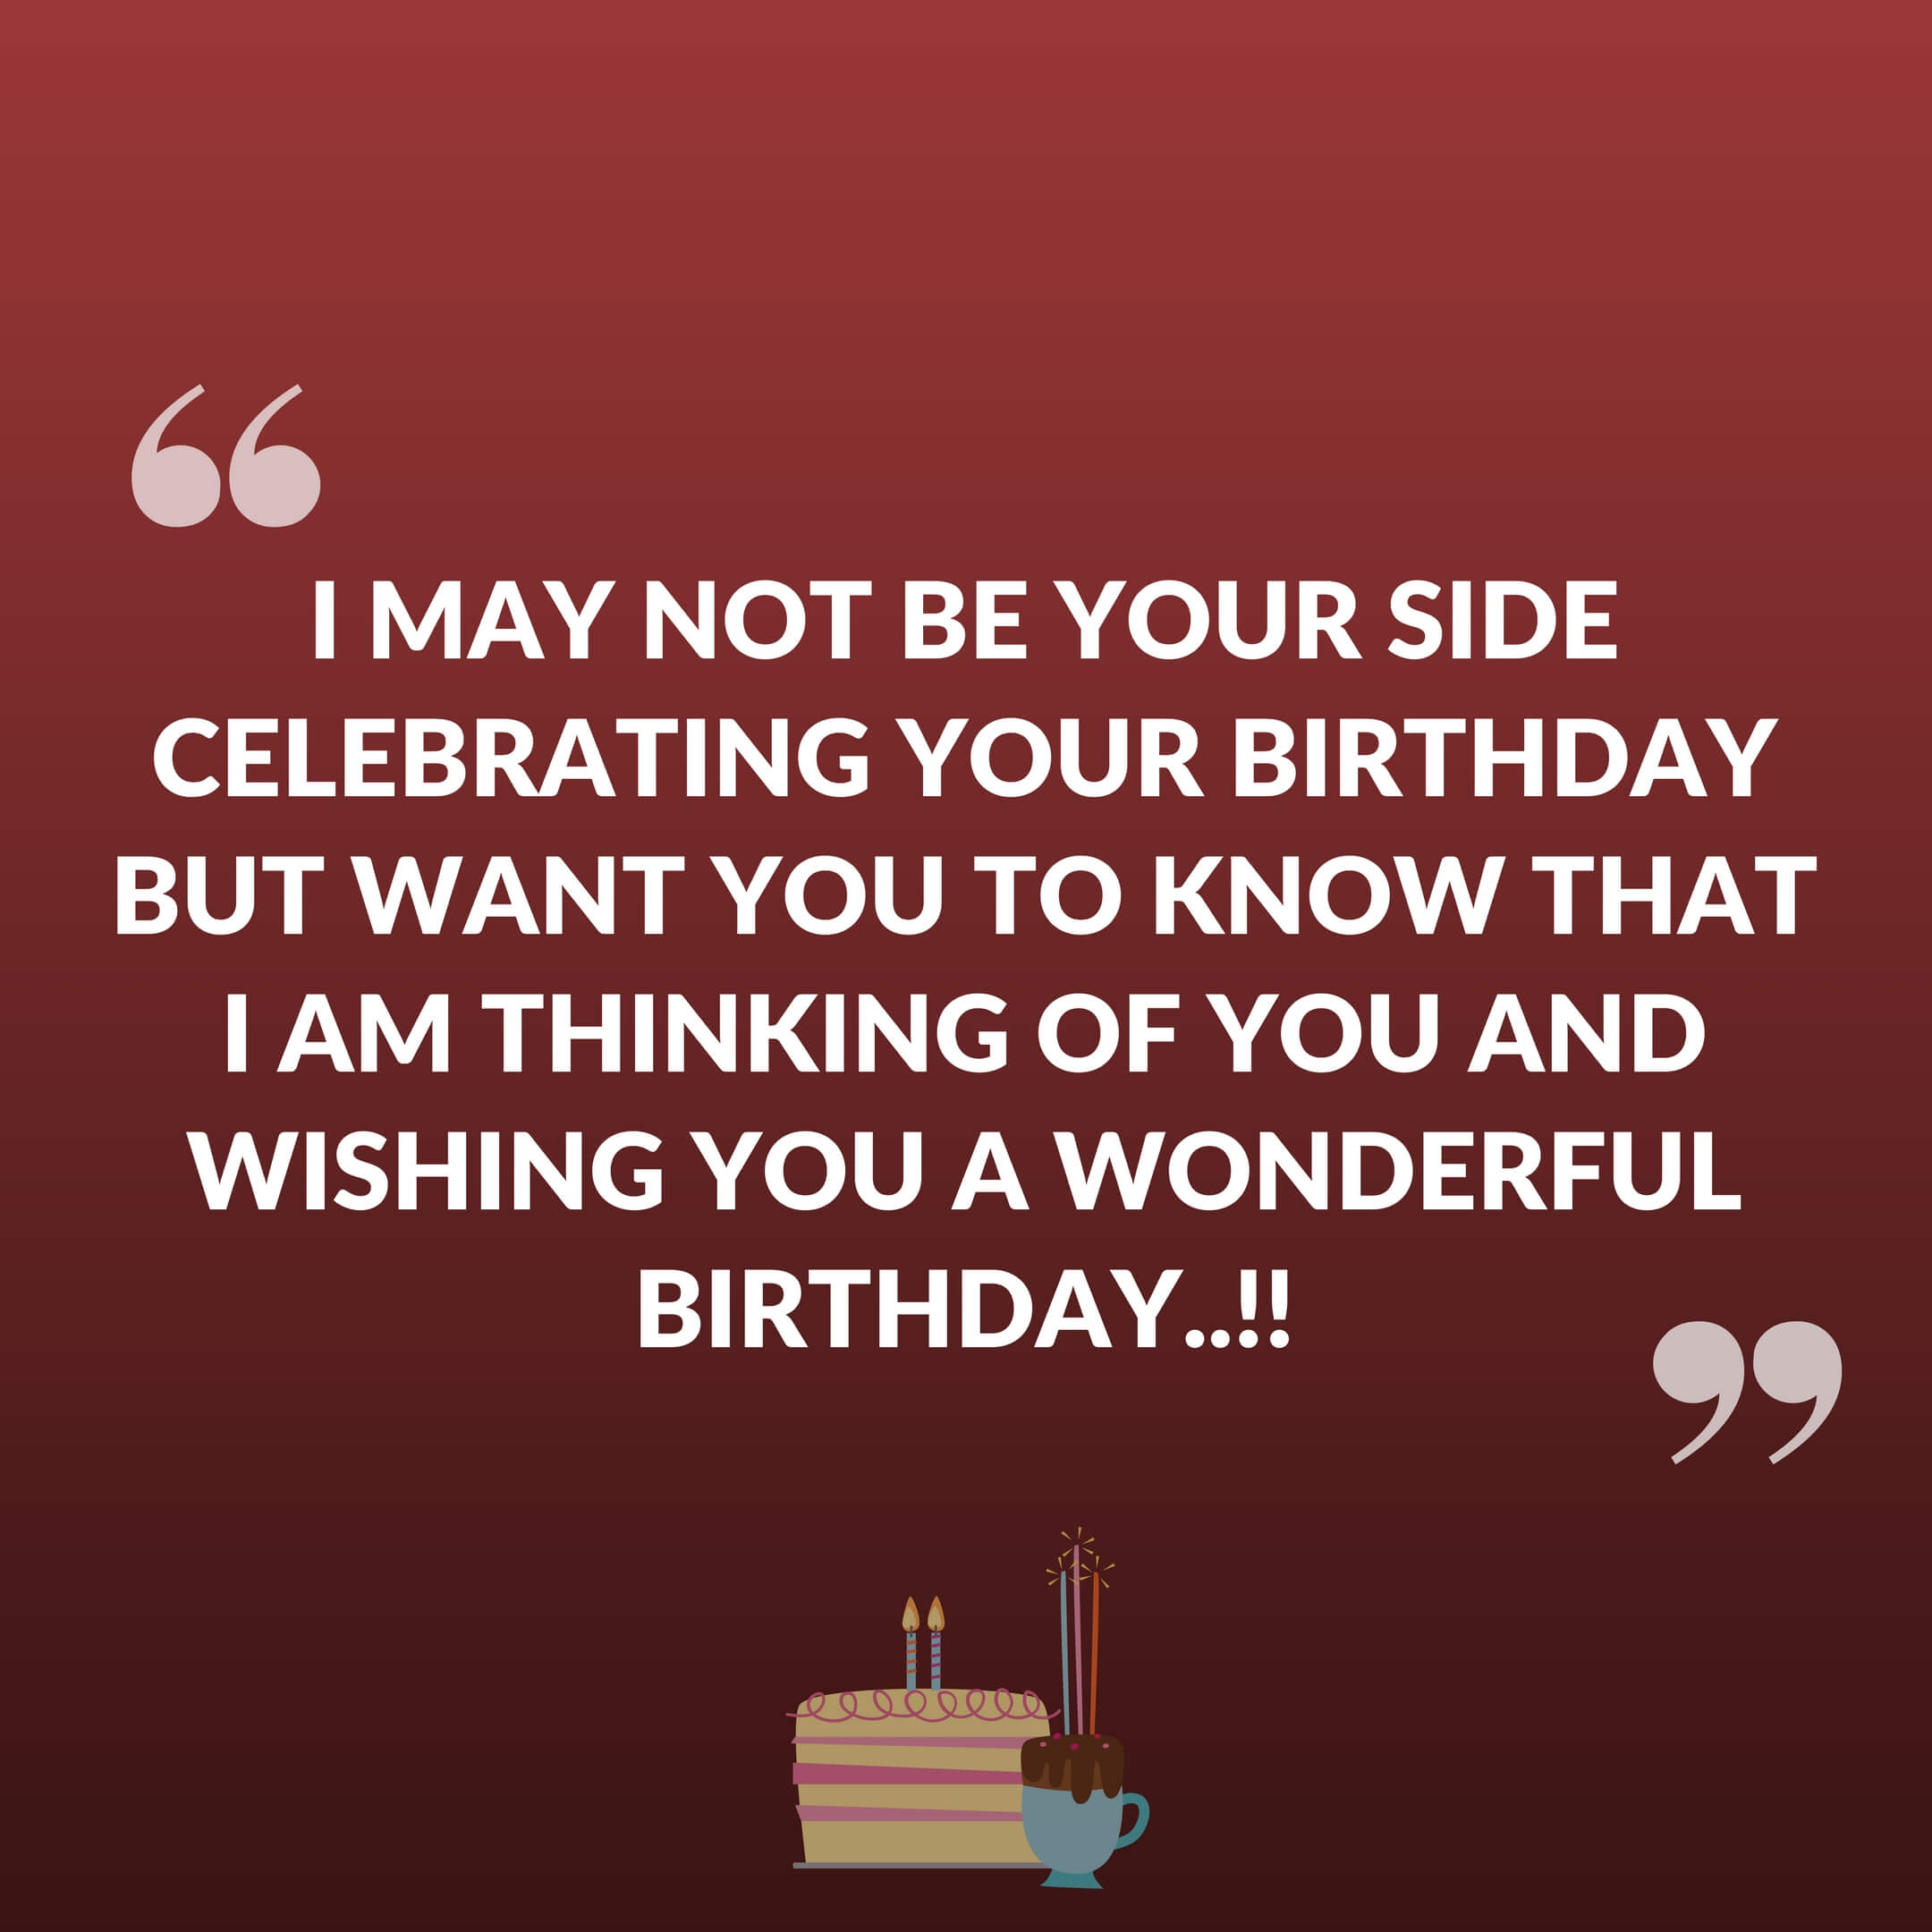 I may not be your side Celebrating your birthday but want you to know that I am thinking of you and wishing you a wonderful birthday.